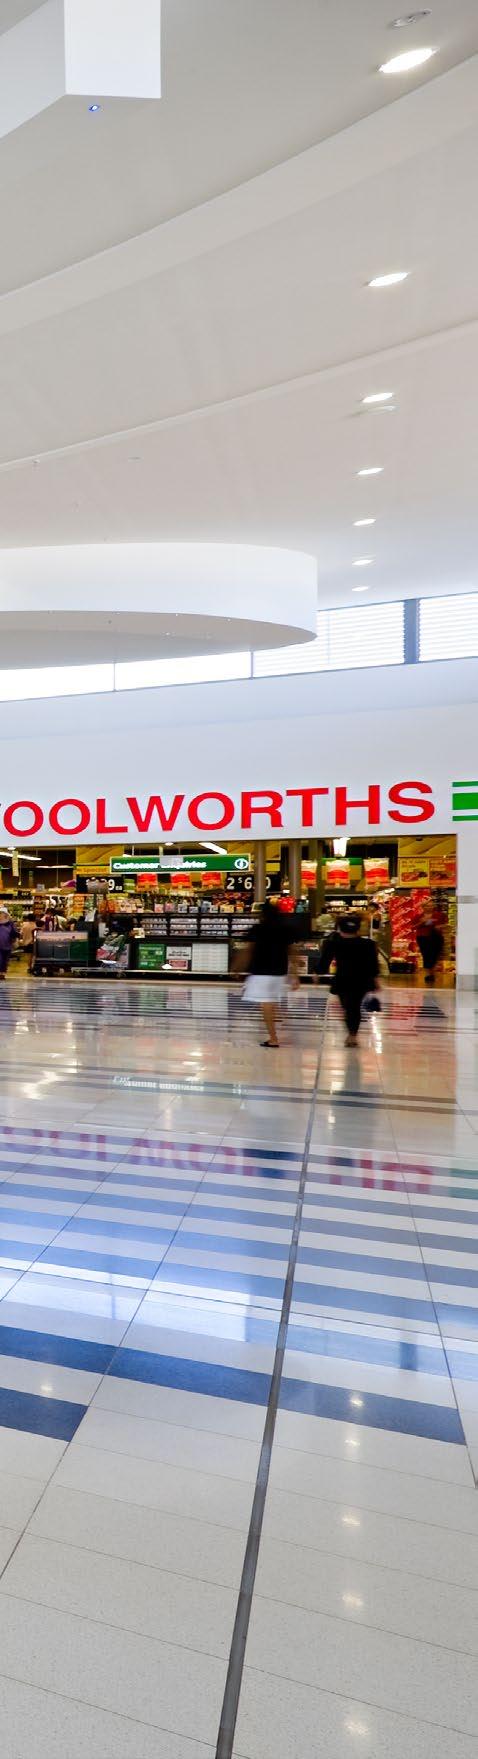 Introduction Currently home to a Woolworths Supermarket and 12 supporting specialty stores, Fairfield Central has performed exceptionally well with low vacancies and high yielding sales figures since